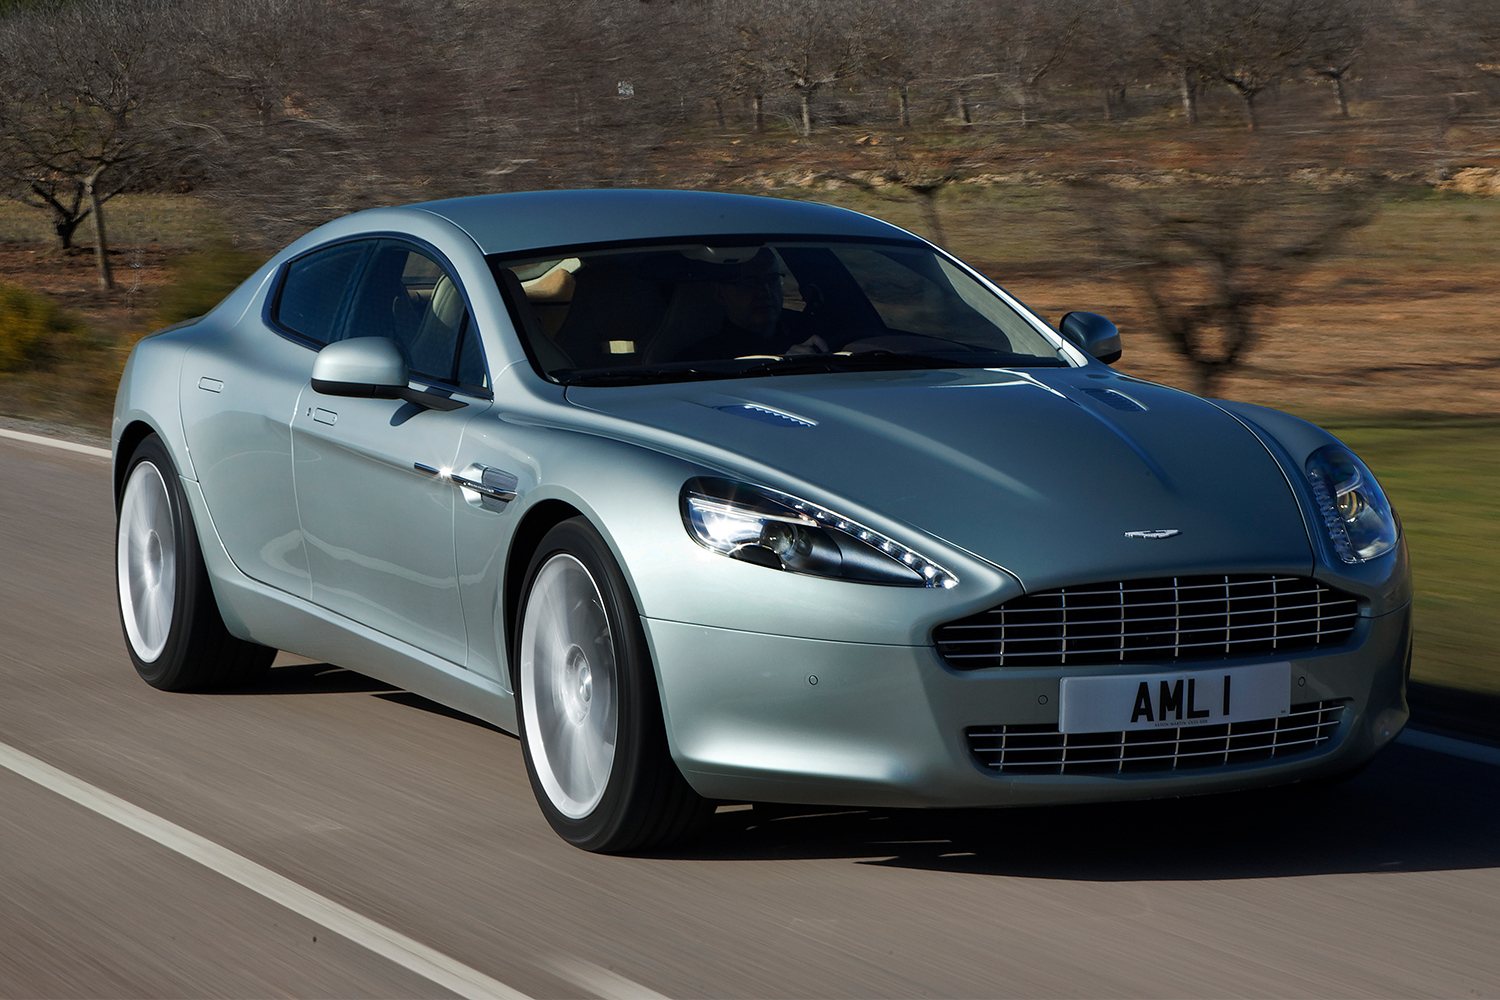 The Aston Martin Rapide, the brand's first-ever four-door car